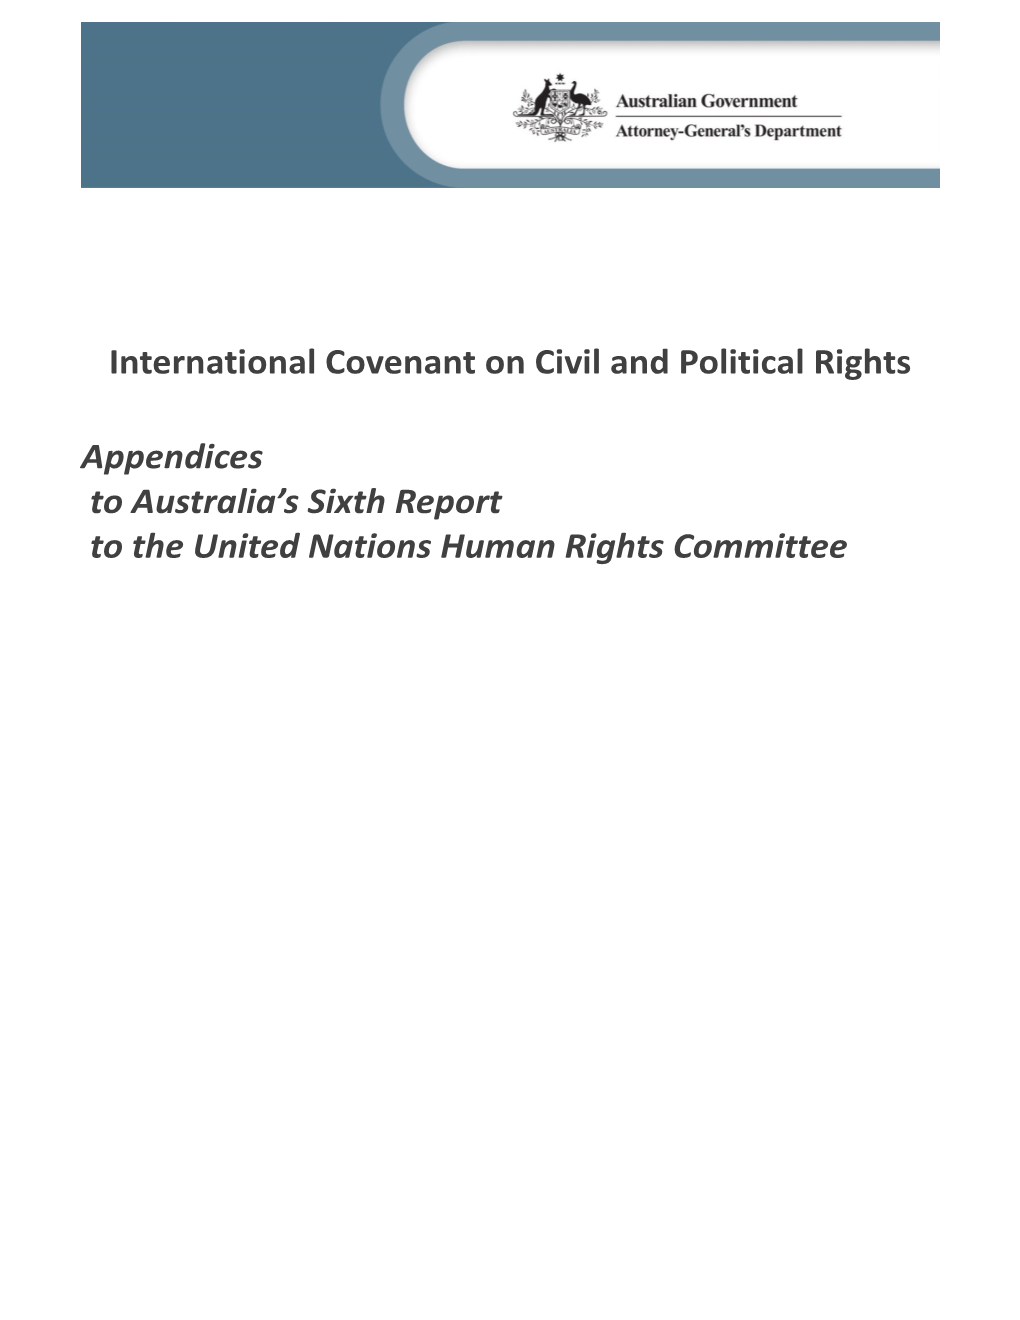 International Covenant on Civil and Political Rights - Sixth Report of Australia to The